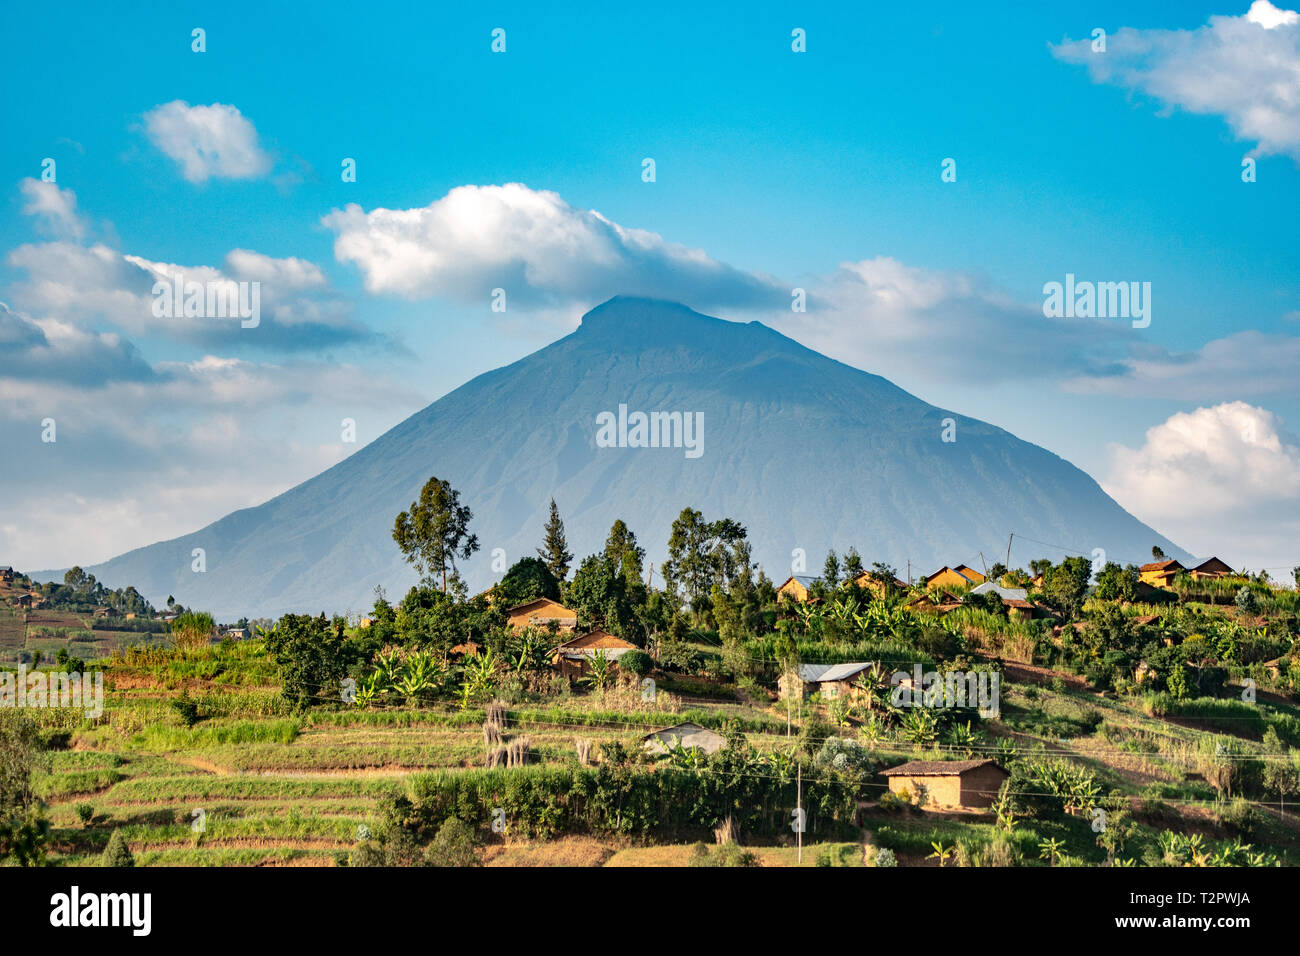 Houses in a small village are dwarfed by the looming presence of a volcanic mountain, Rwanda, Stock Photo